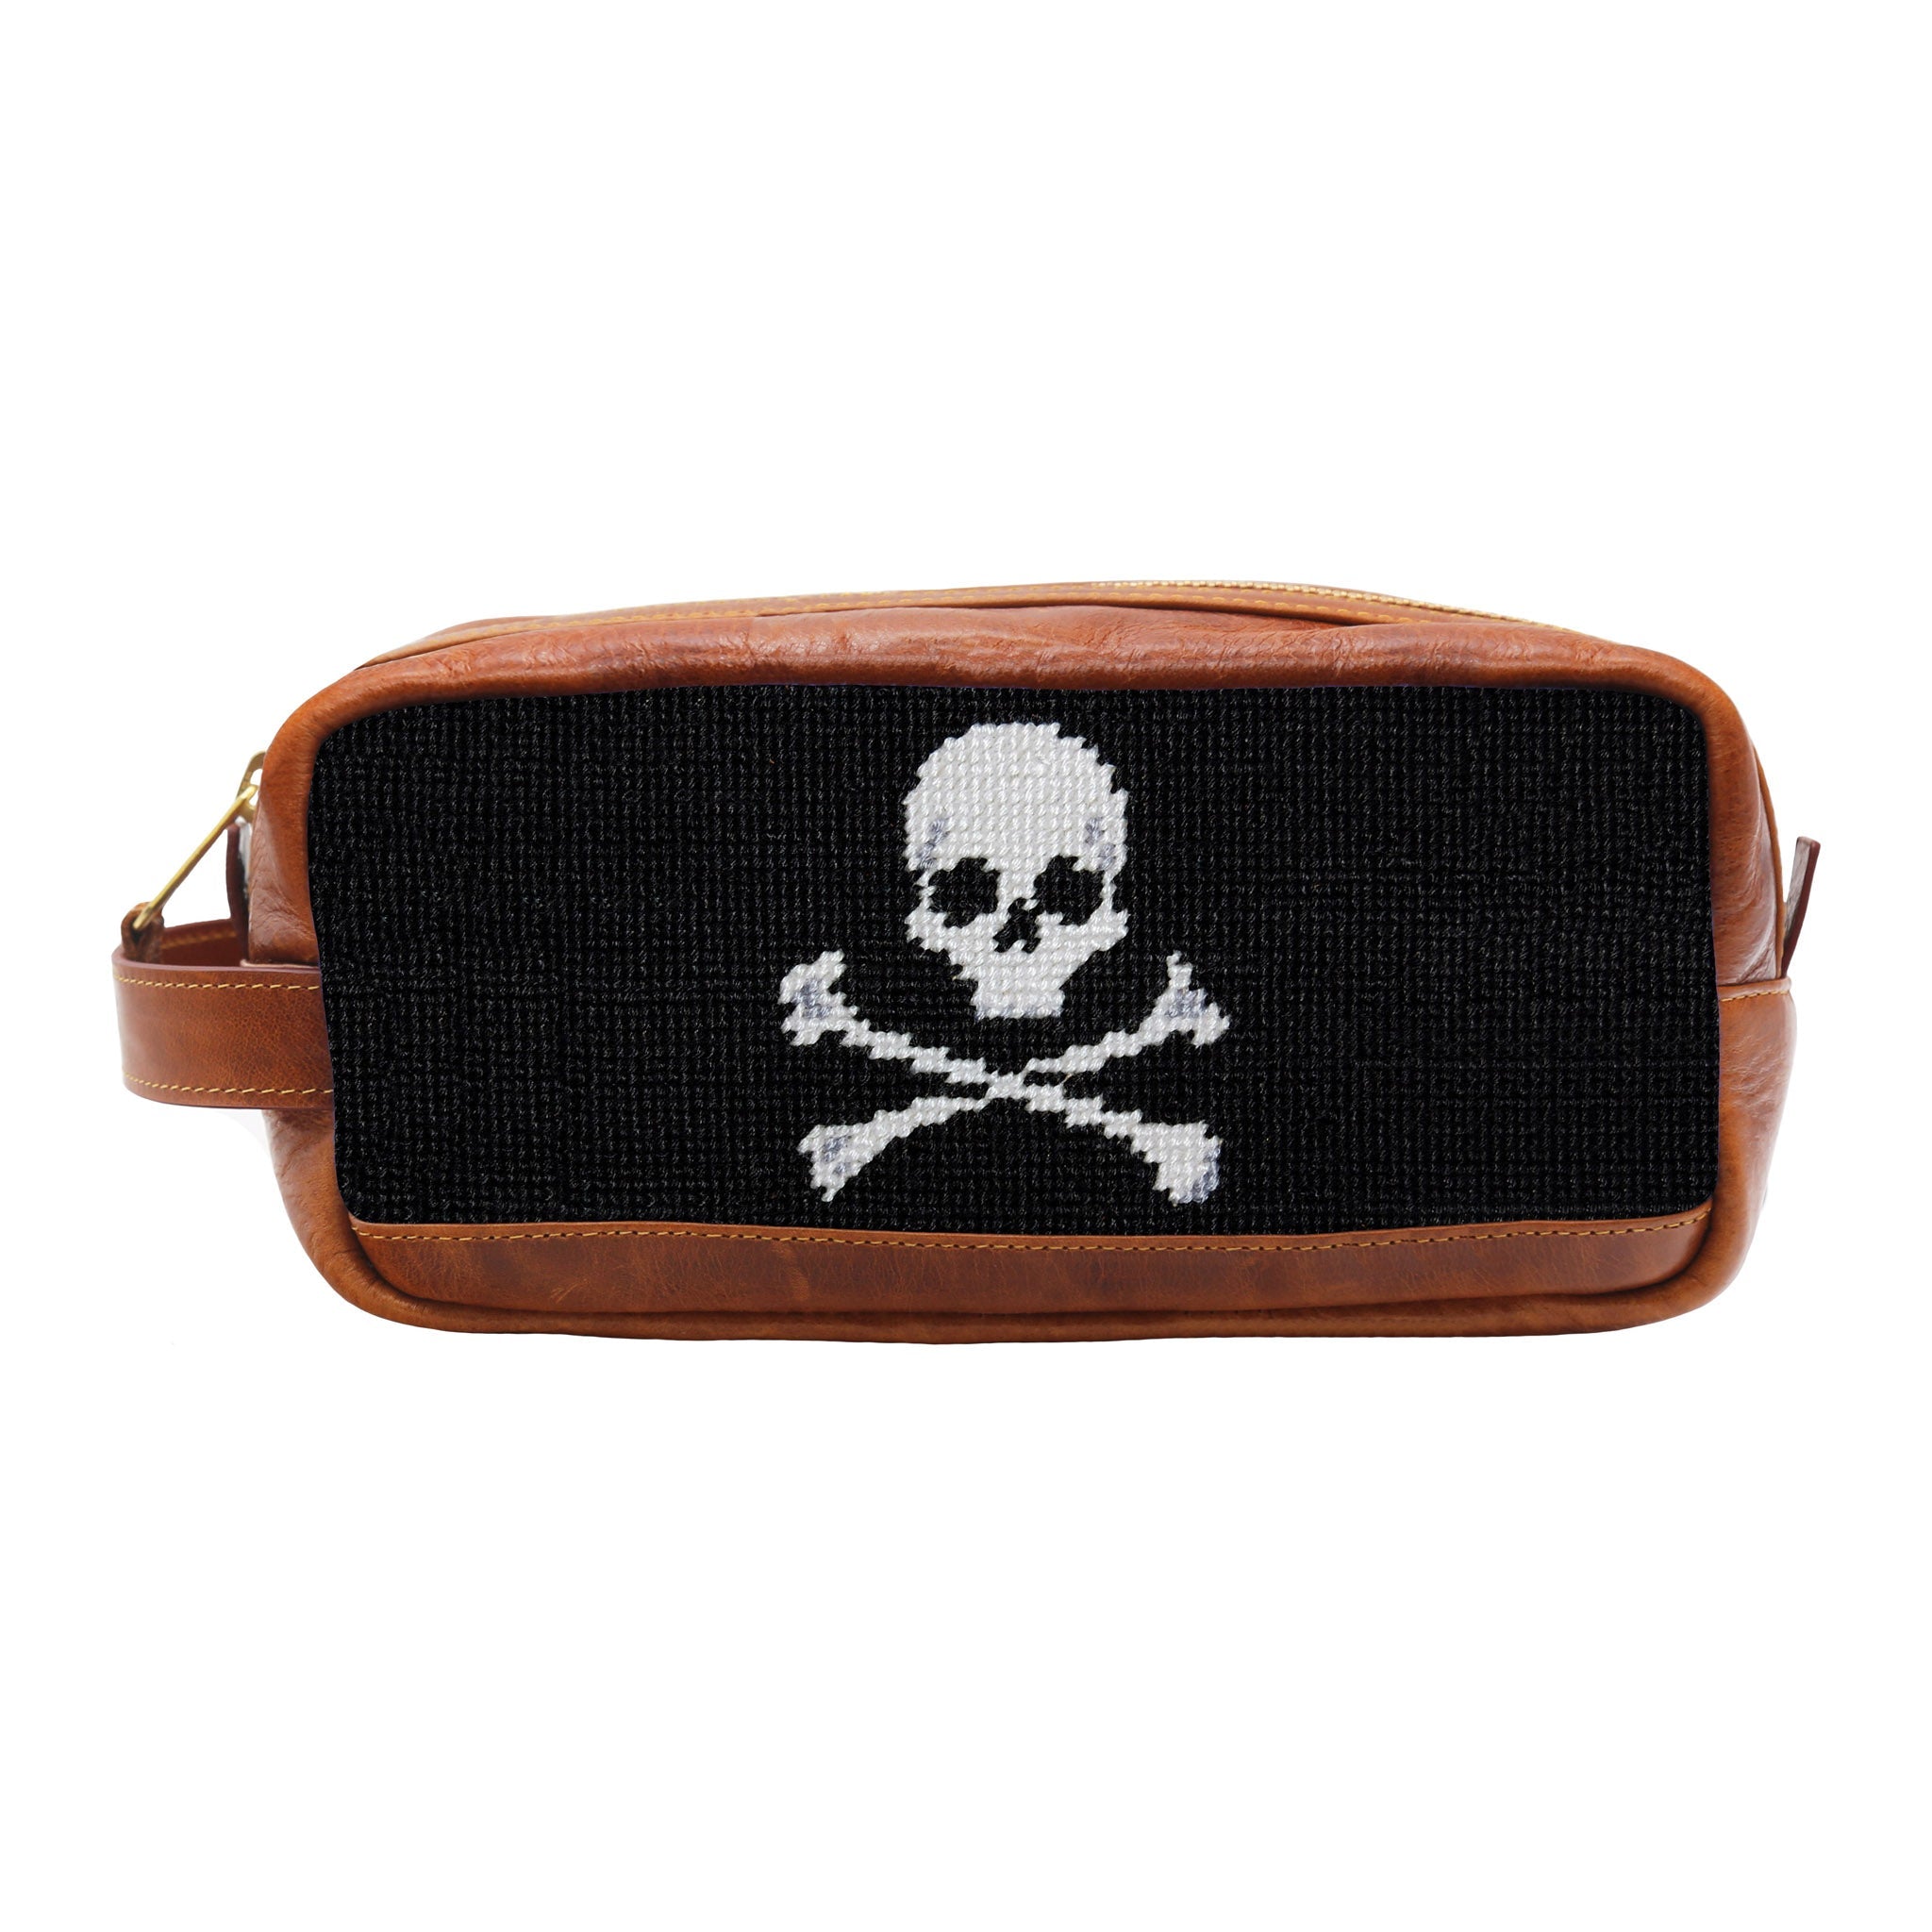 Smathers and Branson Jolly Roger Needlepoint Toiletry Bag Black  